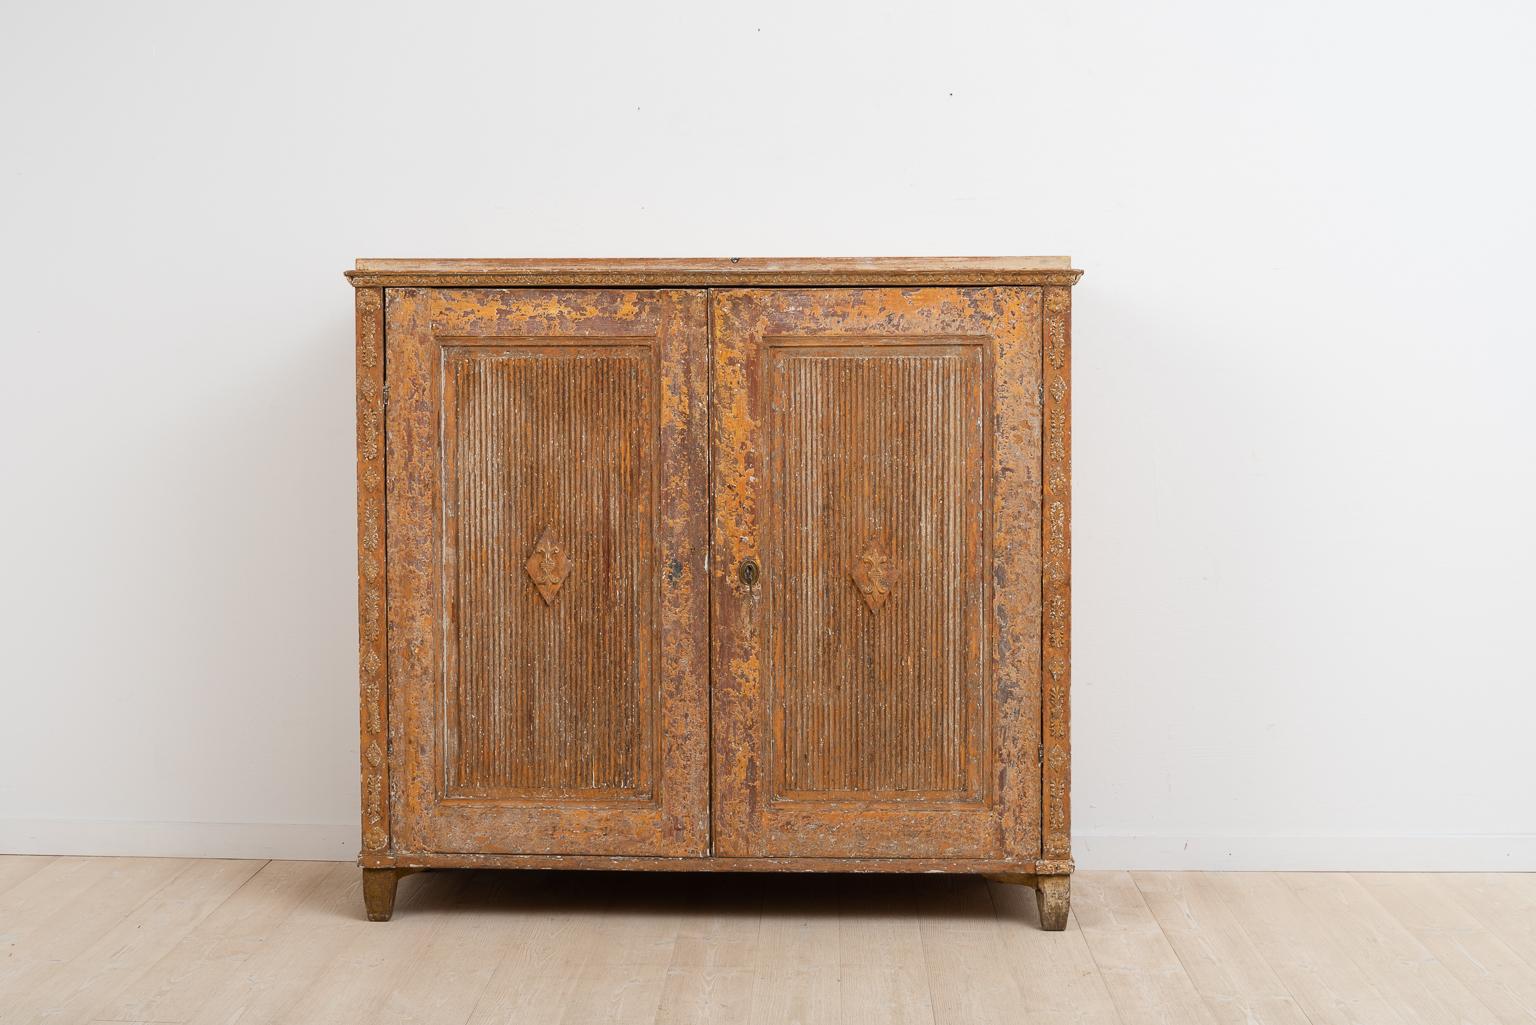 Gustavian sideboard from northern Sweden. Rustic patina. The sideboard has an unusual construction with drawers on the inside. Gustavian decor in the form of pastellage on the doors and sides. There is some smaller damages to the decor on the top’s